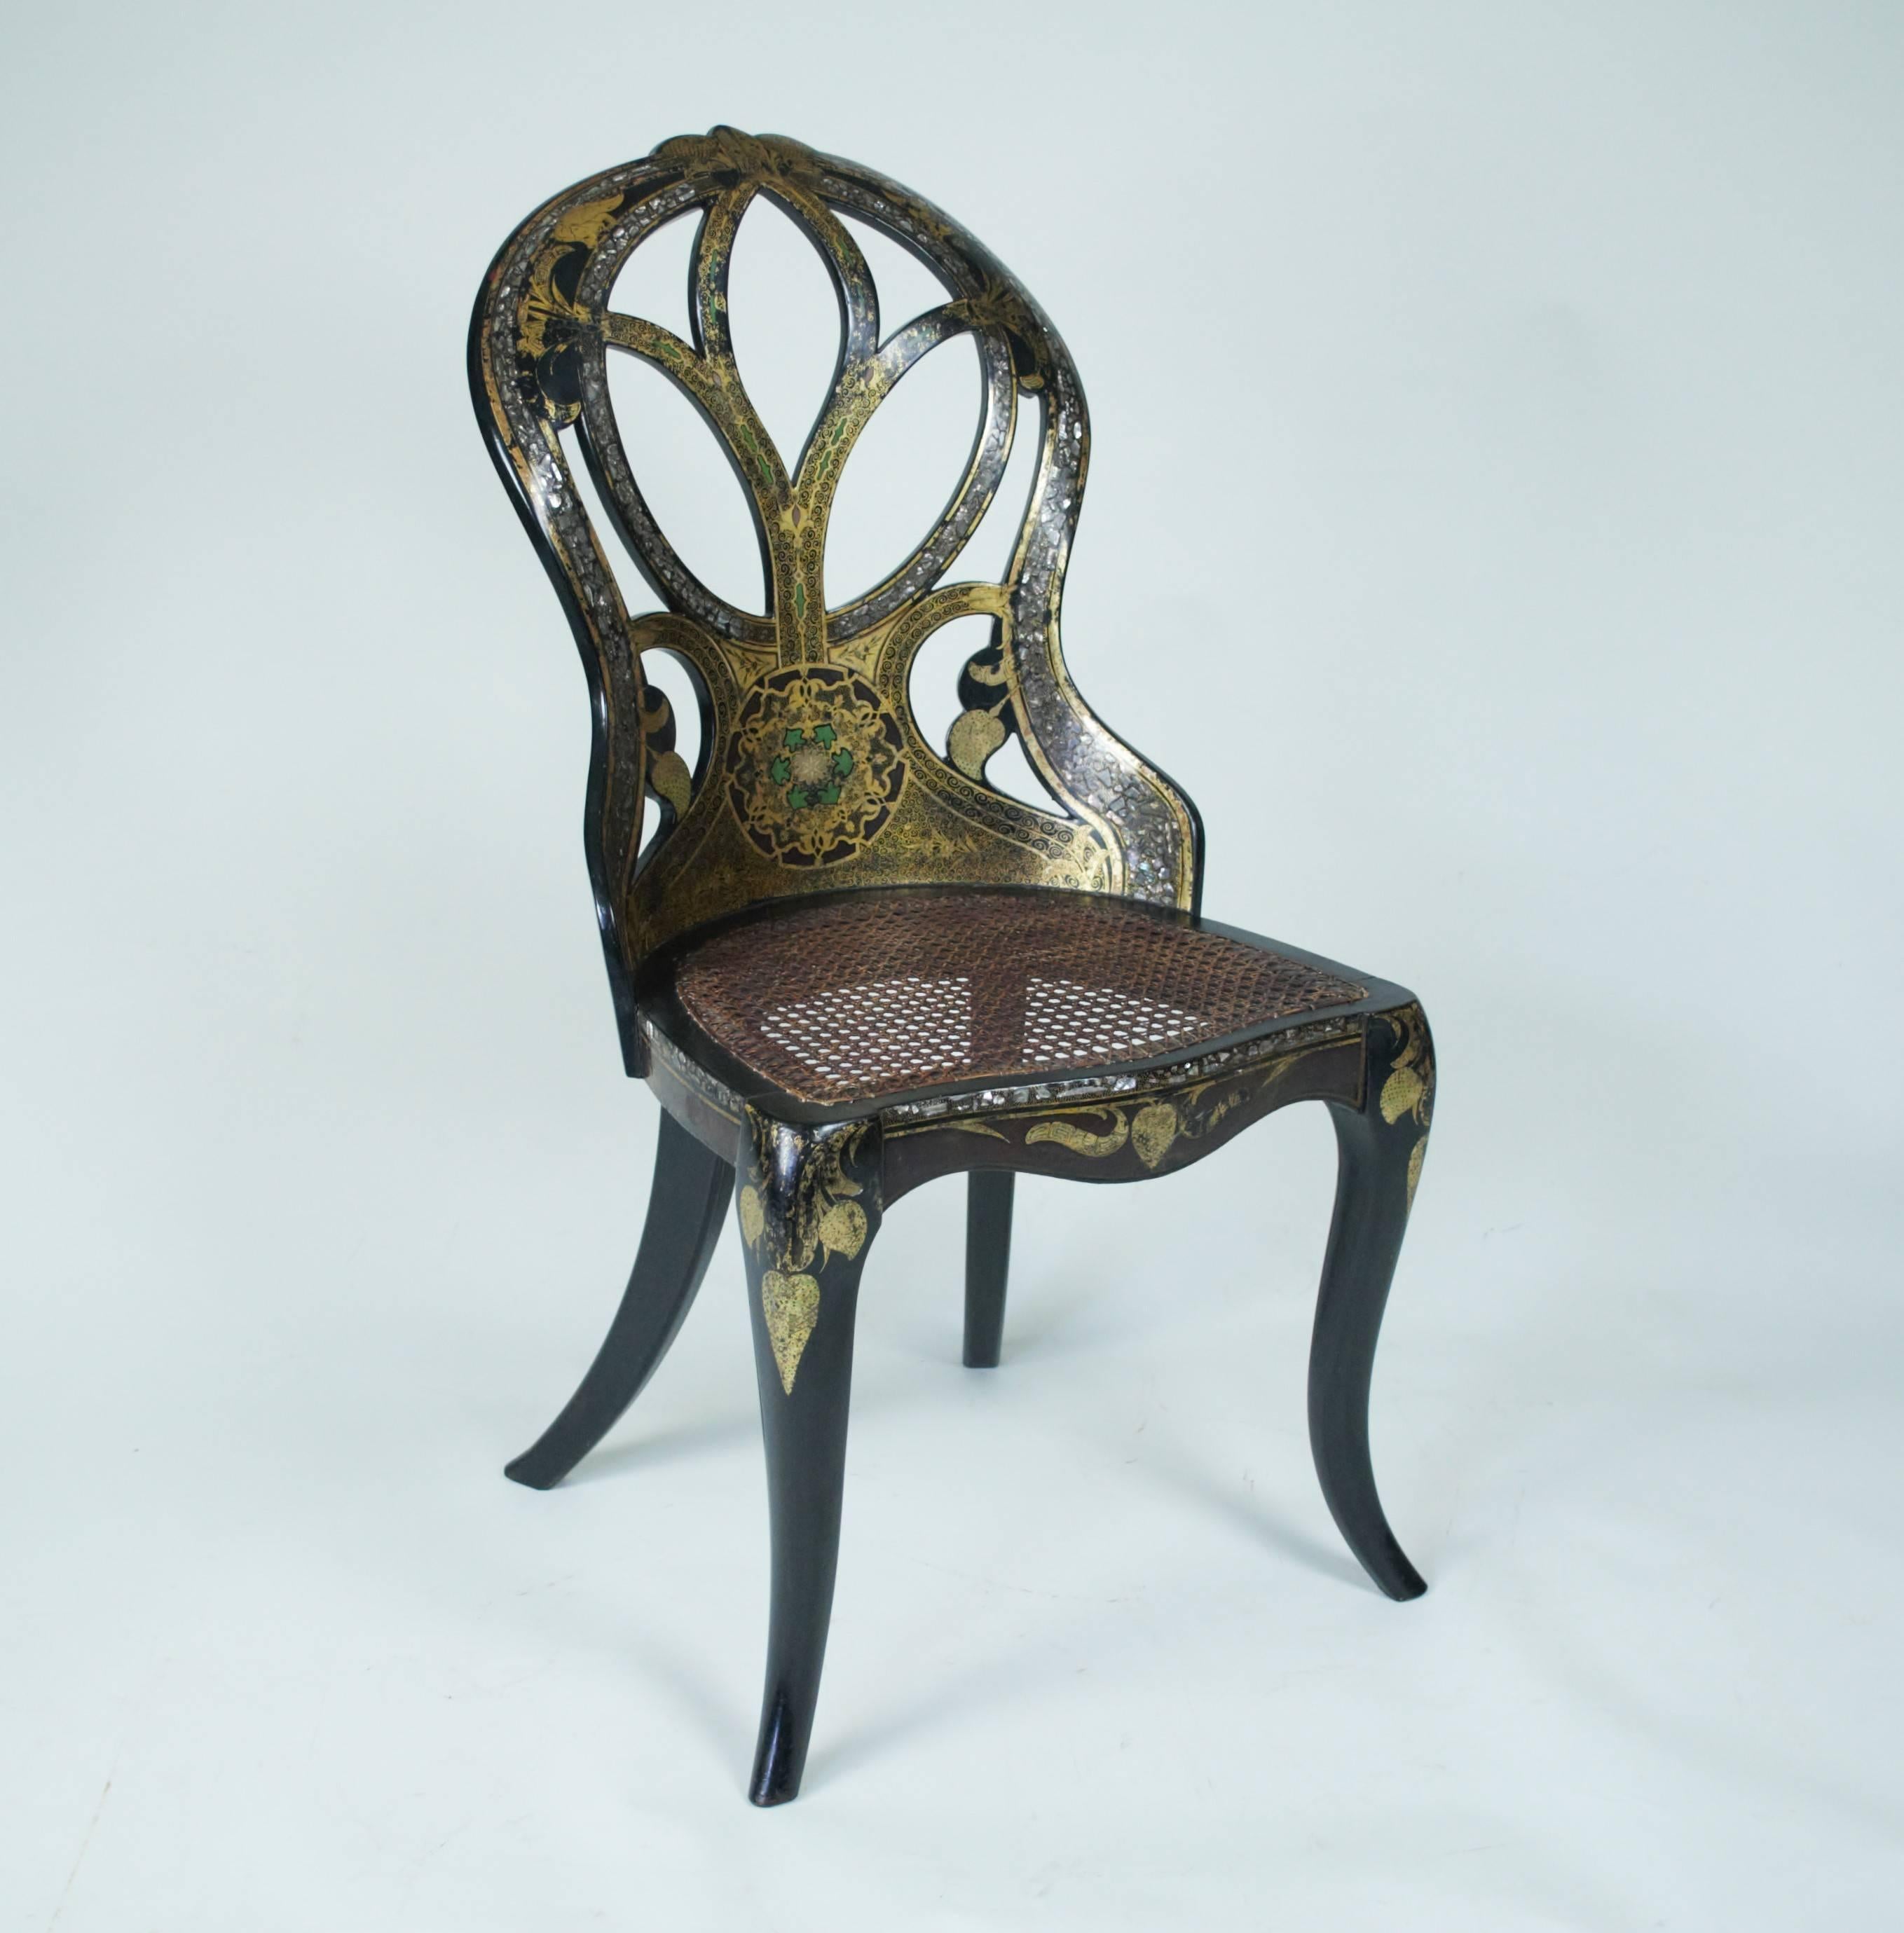 Victorian Pair of Papier-Mâché Japanned Lacquer Side Chairs by Bettridge